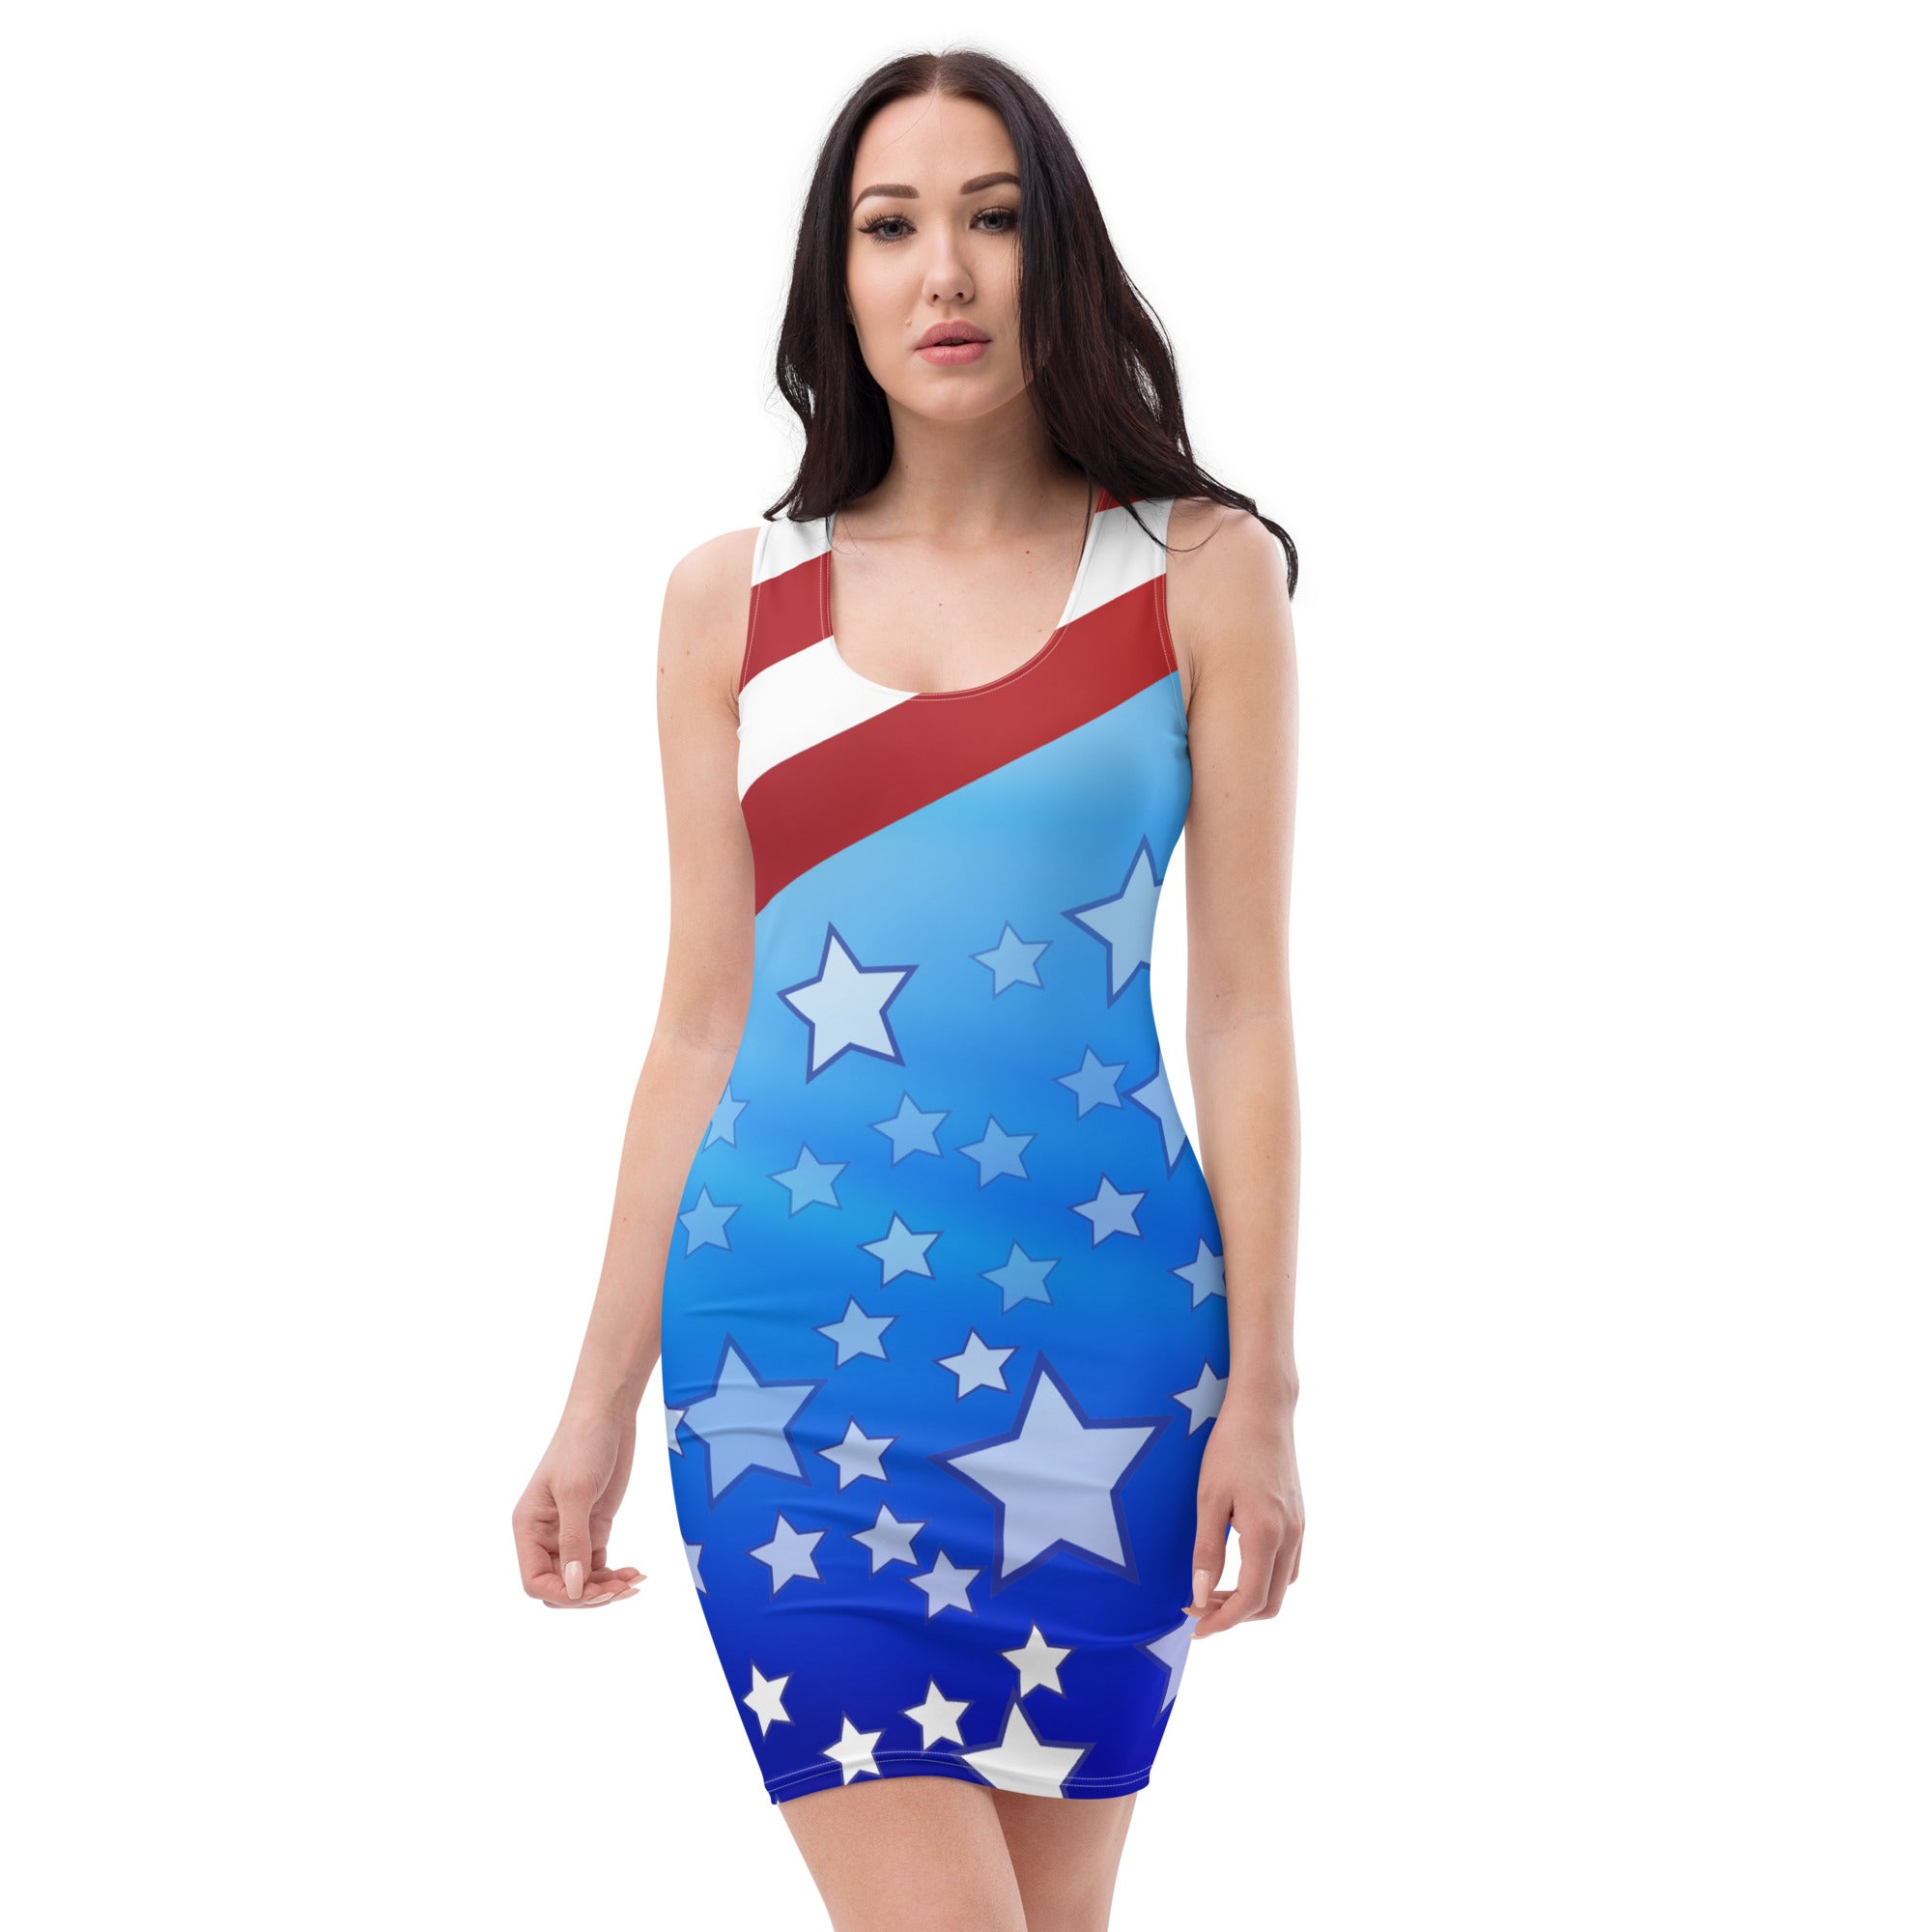 "Freedom Chic: Stars and Stripes Patriotic Comfort Dress", lioness-love